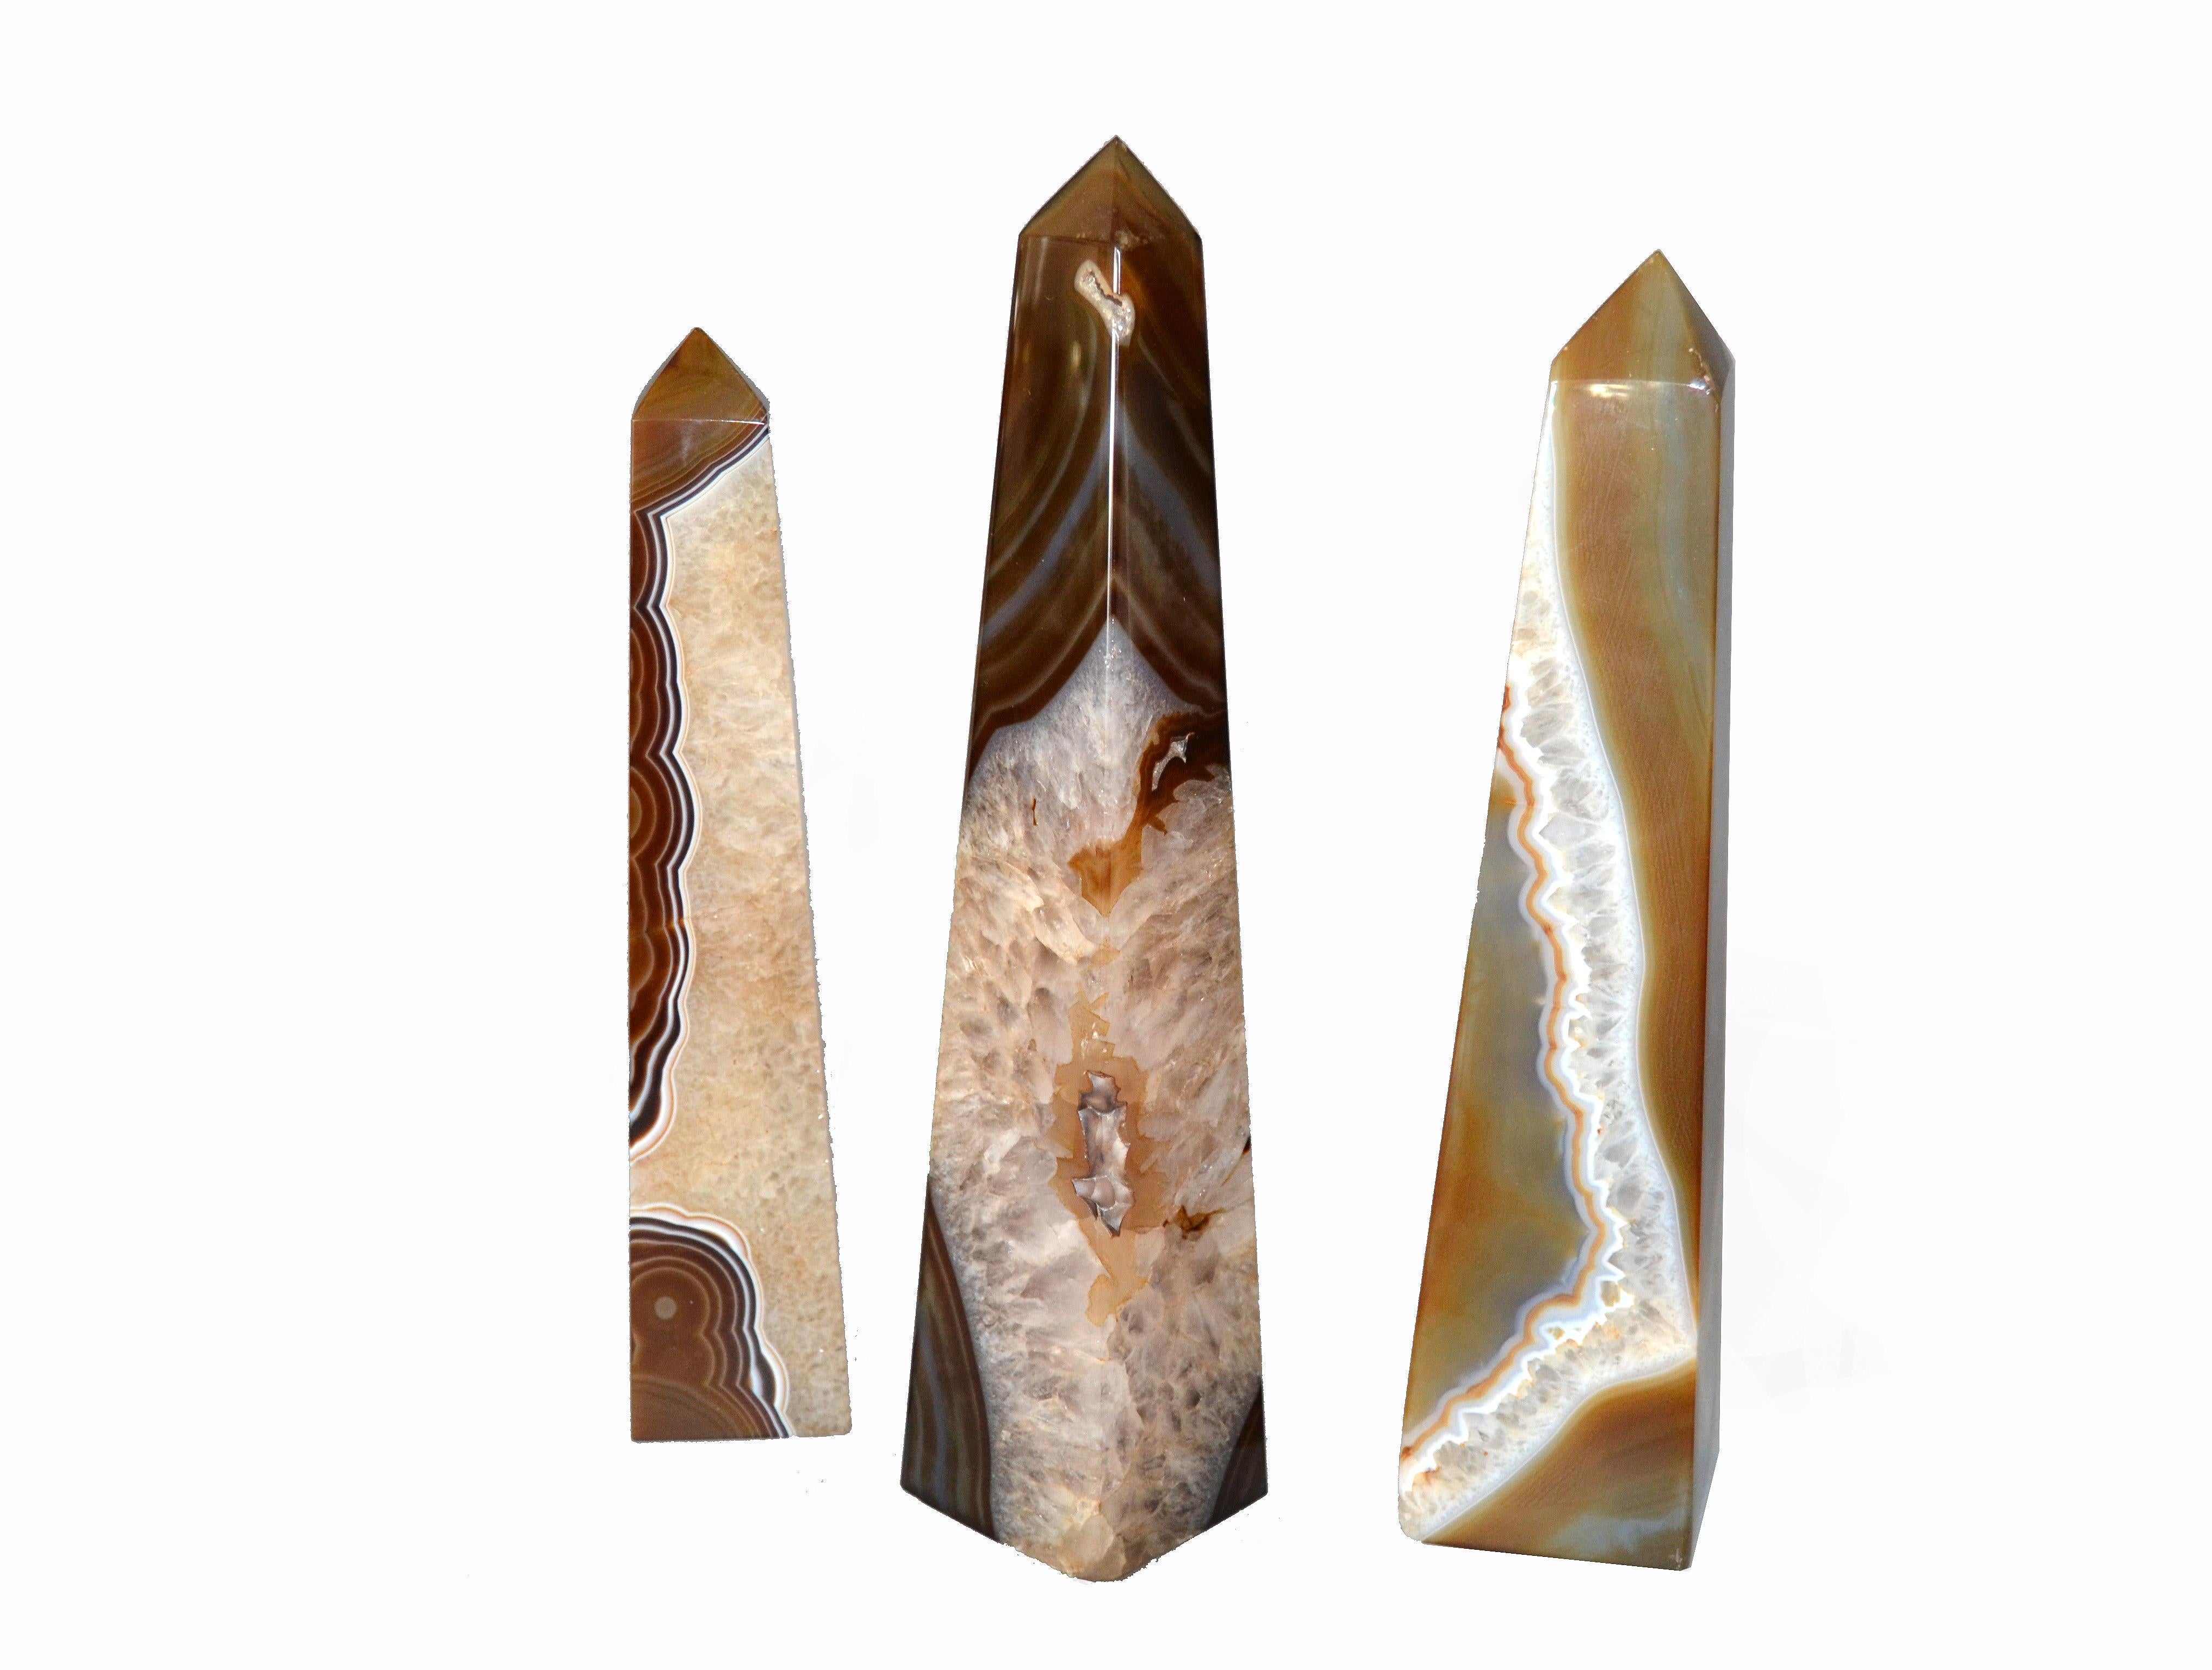 This is a set of three agate Obelisks with amethyst details.
Note the natural banded patterns of these Obelisks.
Simply Beautiful.
Dimensions:
Medium:
Height 11.25 inches, depth 2.75 inches, width 2.75 inches;
Small:
Height 10.5 inches, depth